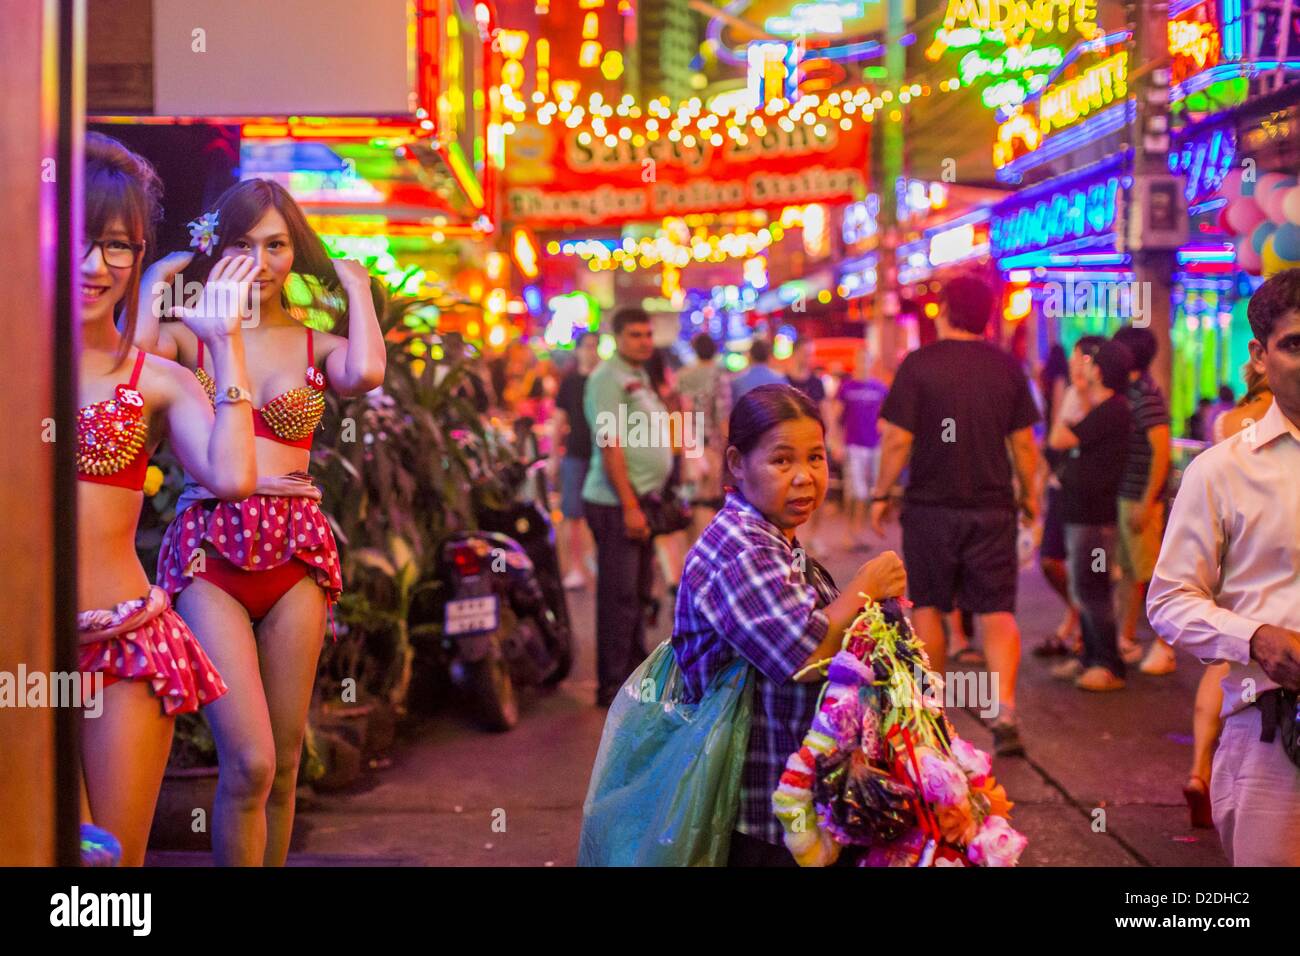 Jan. 12, 2013 - Bangkok, Thailand - A woman who sells garters to workers in the red light district of Soi Cowboy walks down the street between ''Ladyboy'' entertainers and tourists. In Thai, the ladyboys are called kathoey. Many work in the entertainment and night life sectors of the Thai economy.  Prostitution in Thailand is illegal, although in practice it is tolerated and partly regulated. Prostitution is practiced openly throughout the country. The number of prostitutes is difficult to determine, estimates vary widely. Since the Vietnam War, Thailand has gained international notoriety amon Stock Photo